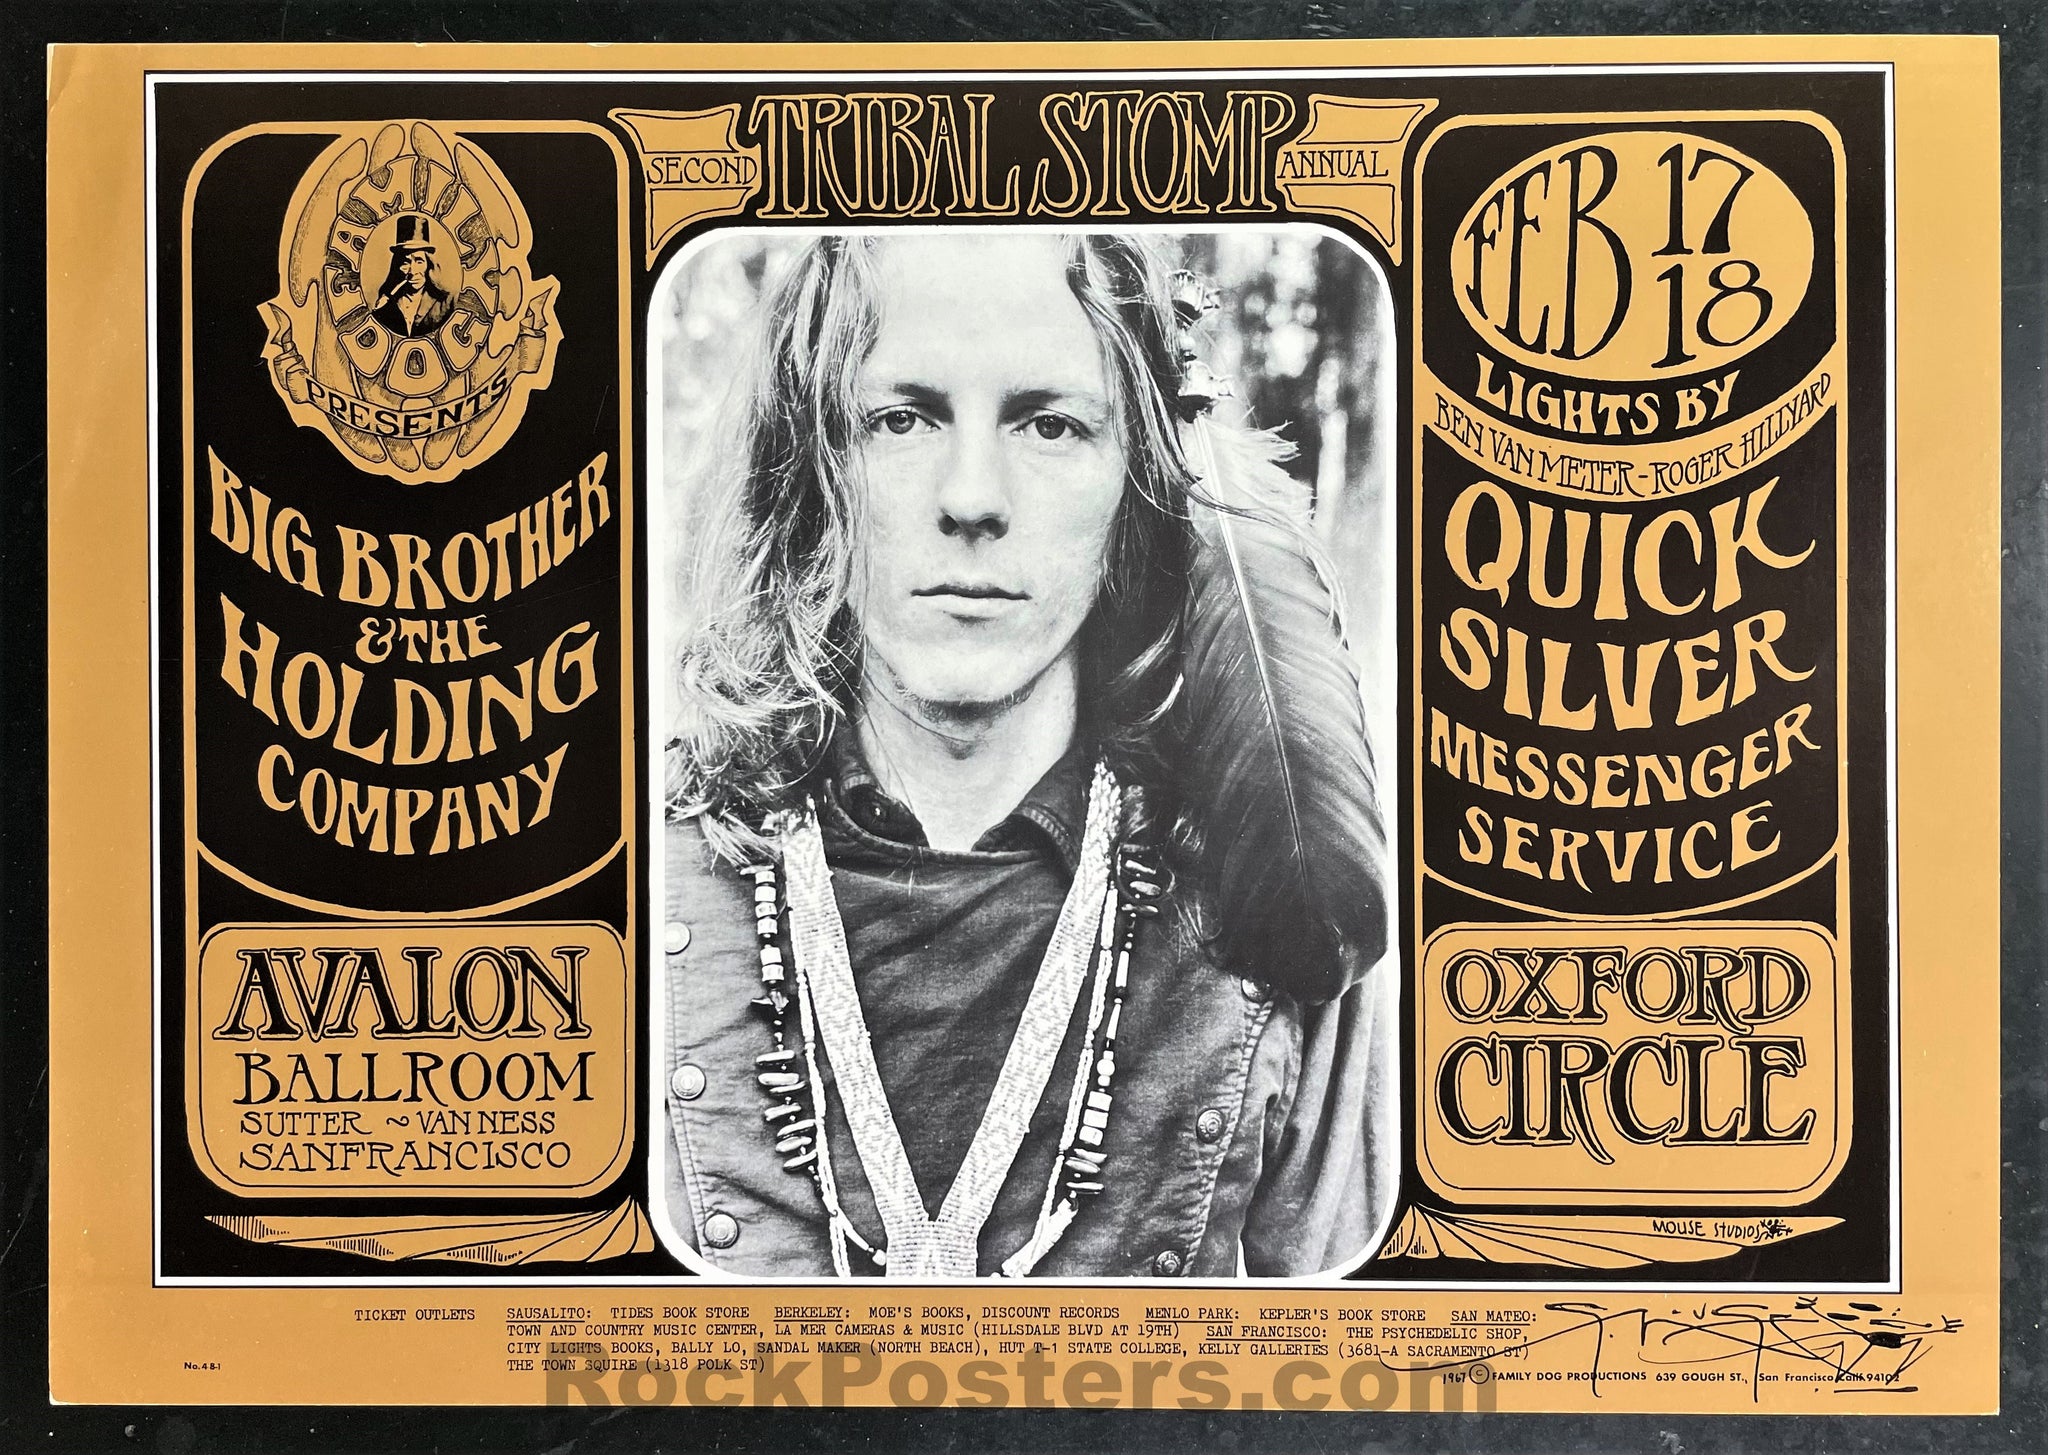 AUCTION -  FD-48 - Big Brother - Stanley Mouse SIGNED - 1967 Poster - Avalon Ballroom - Near Mint Minus